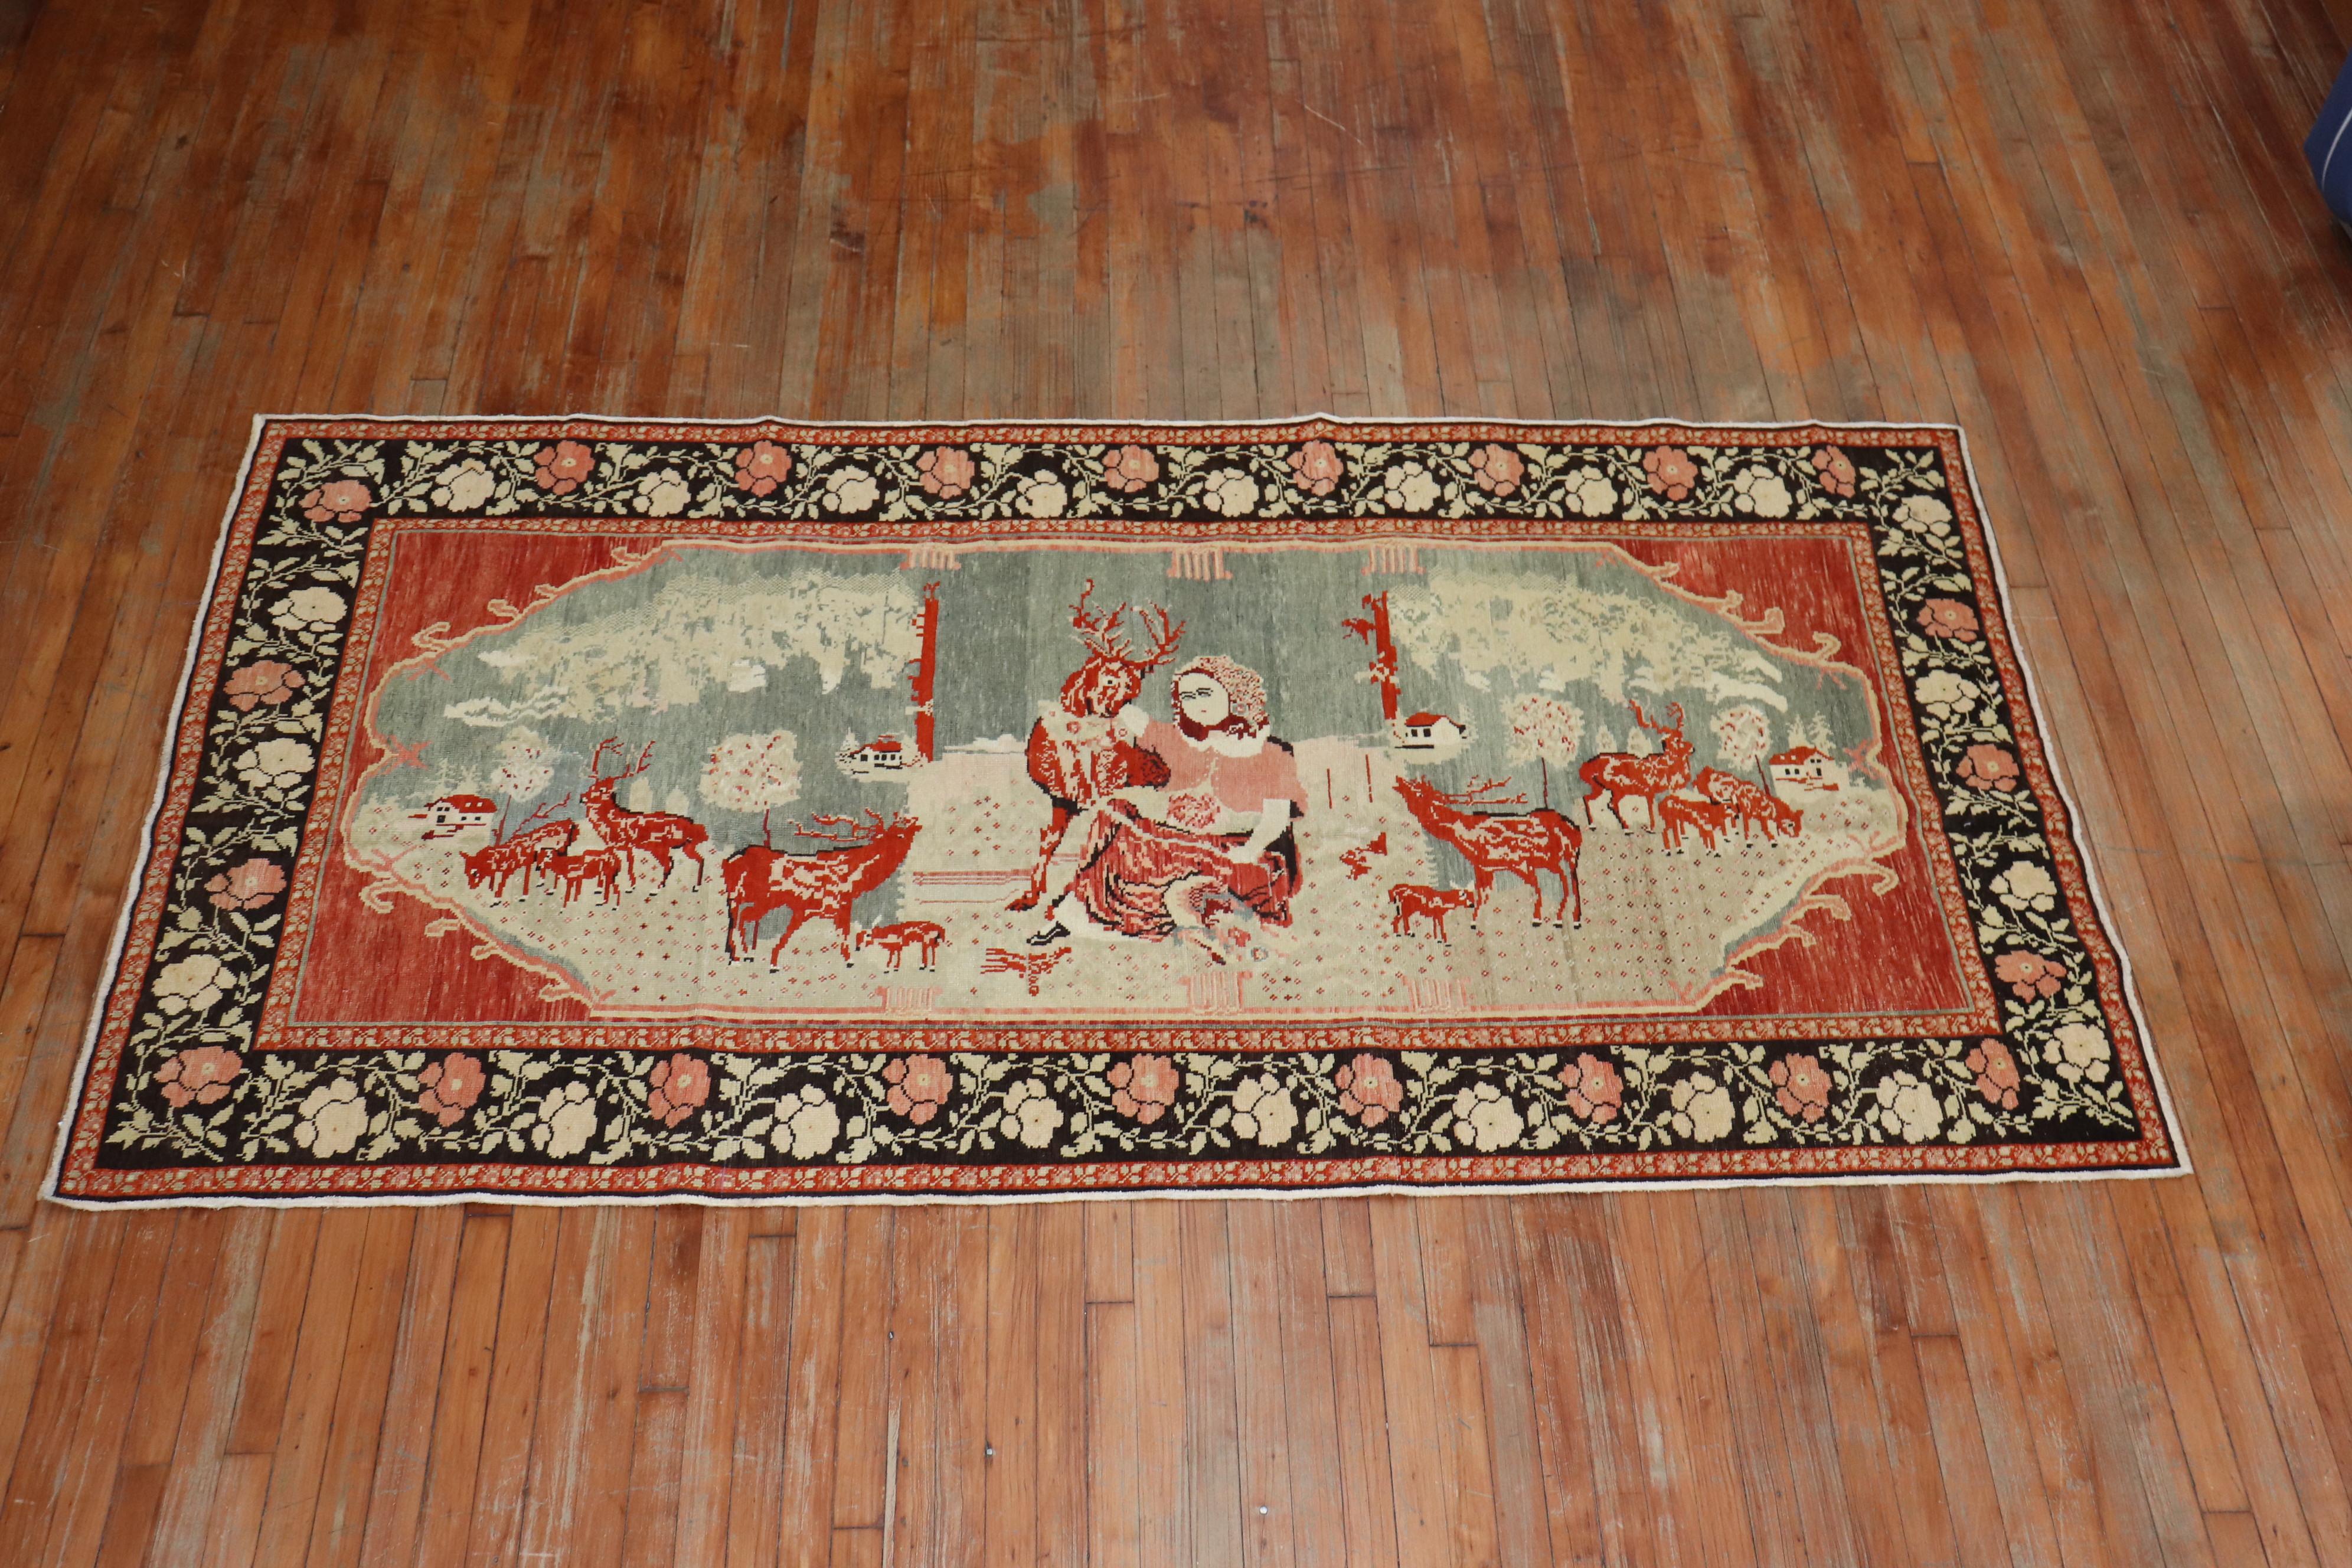 A pictorial Russian Karabagh rug depicting a bunch of reindeers floating around a lady. The background is a tomato red, the border has a floral motif in dark brown,

circa 1940. Measures: 4'6